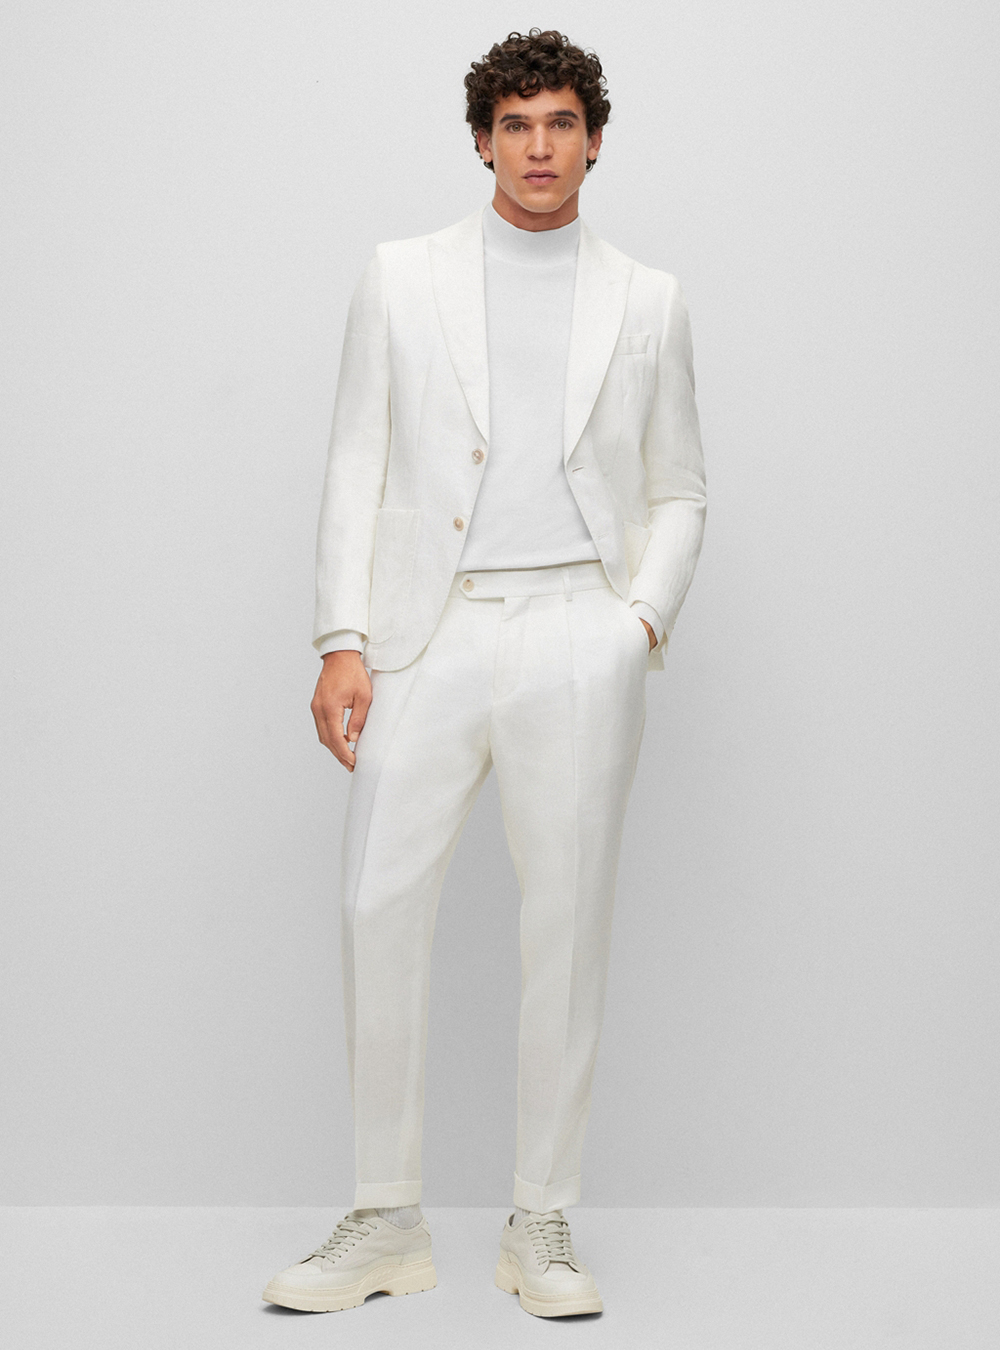 white suit, white turtleneck, and white sneakers